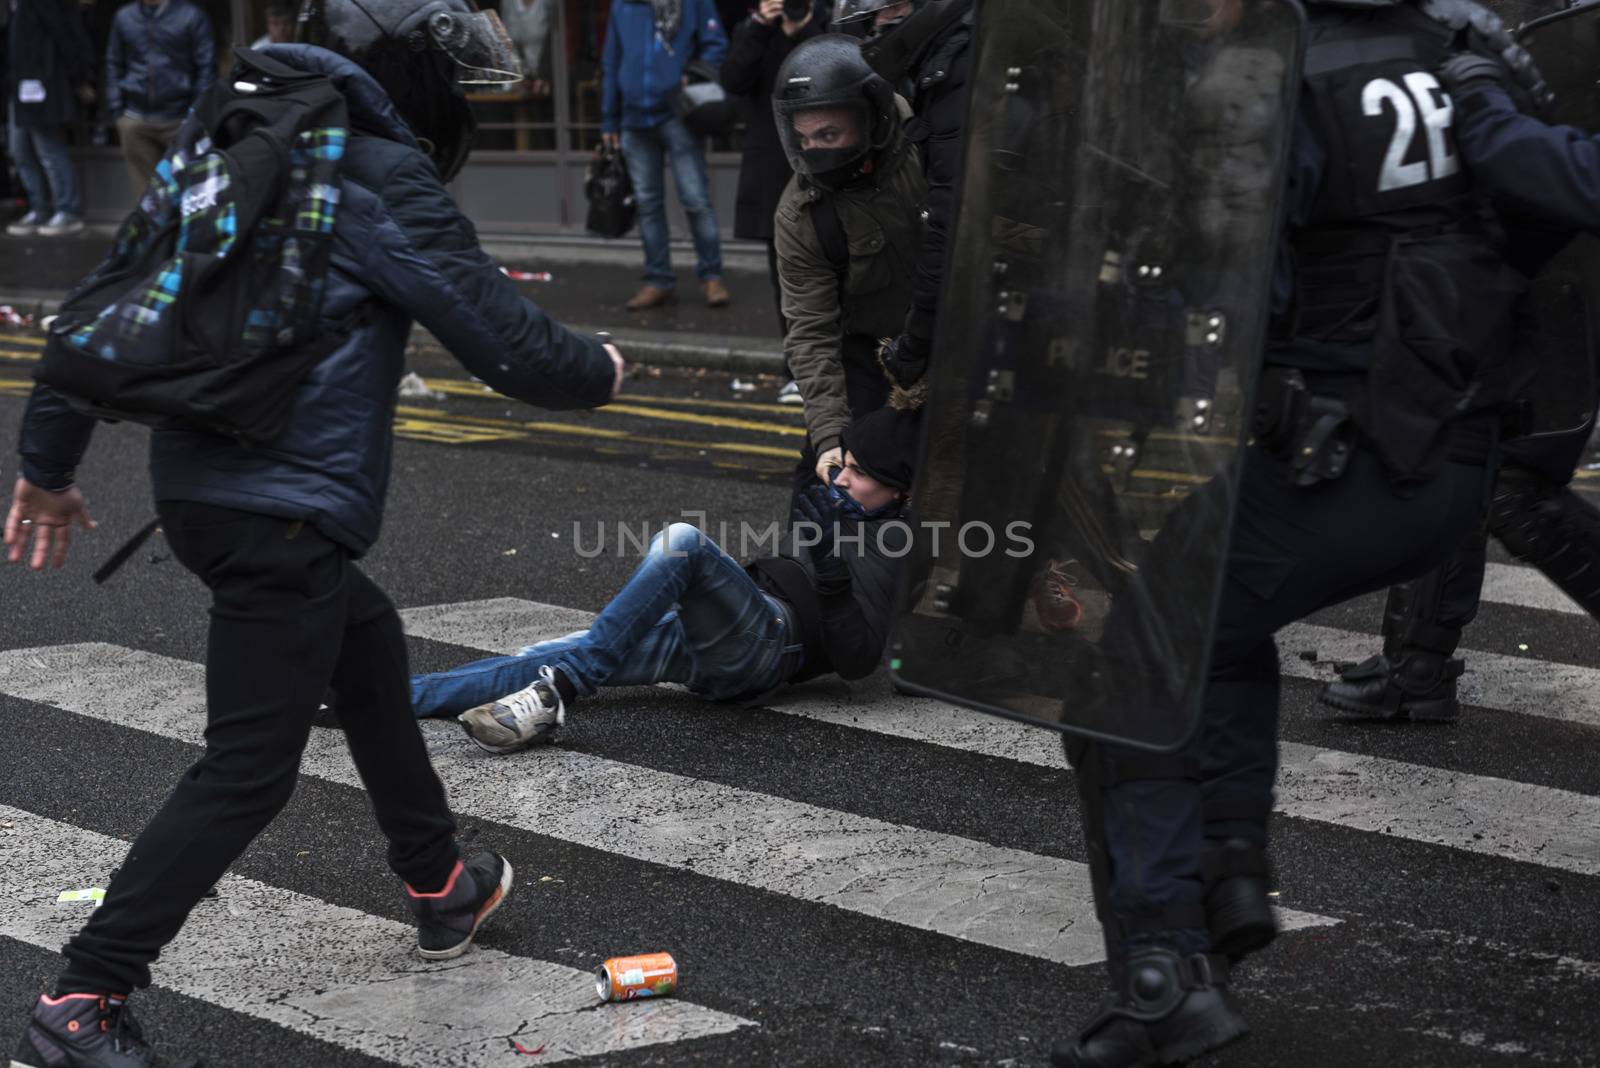 RANCE, Paris: Riot policemen run over a protester during a demonstration against labour reform in Paris on April 9, 2016.